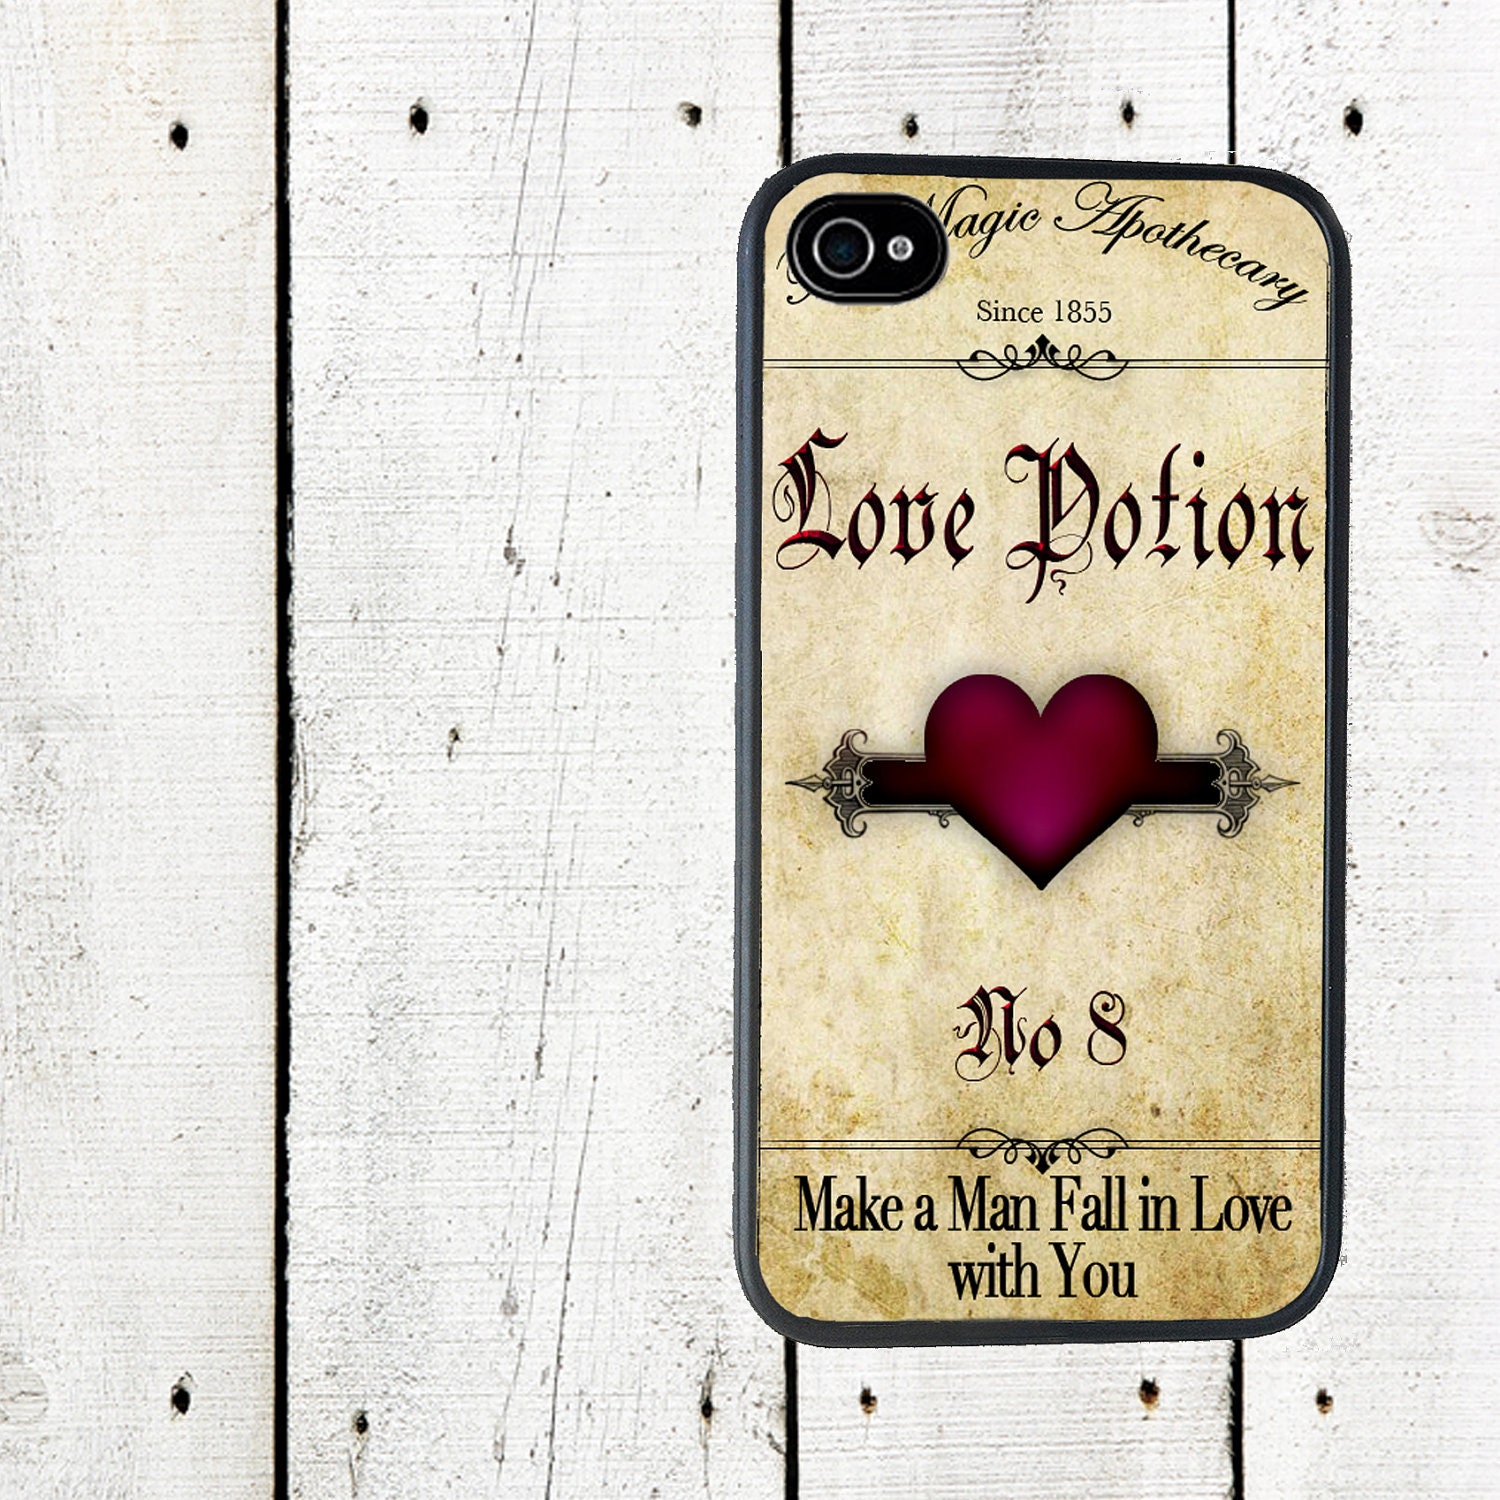 Love Potion iPhone Case iPhone 4 and 4s Cover - iPhone 5 Case - Valentine's Day - to find a man